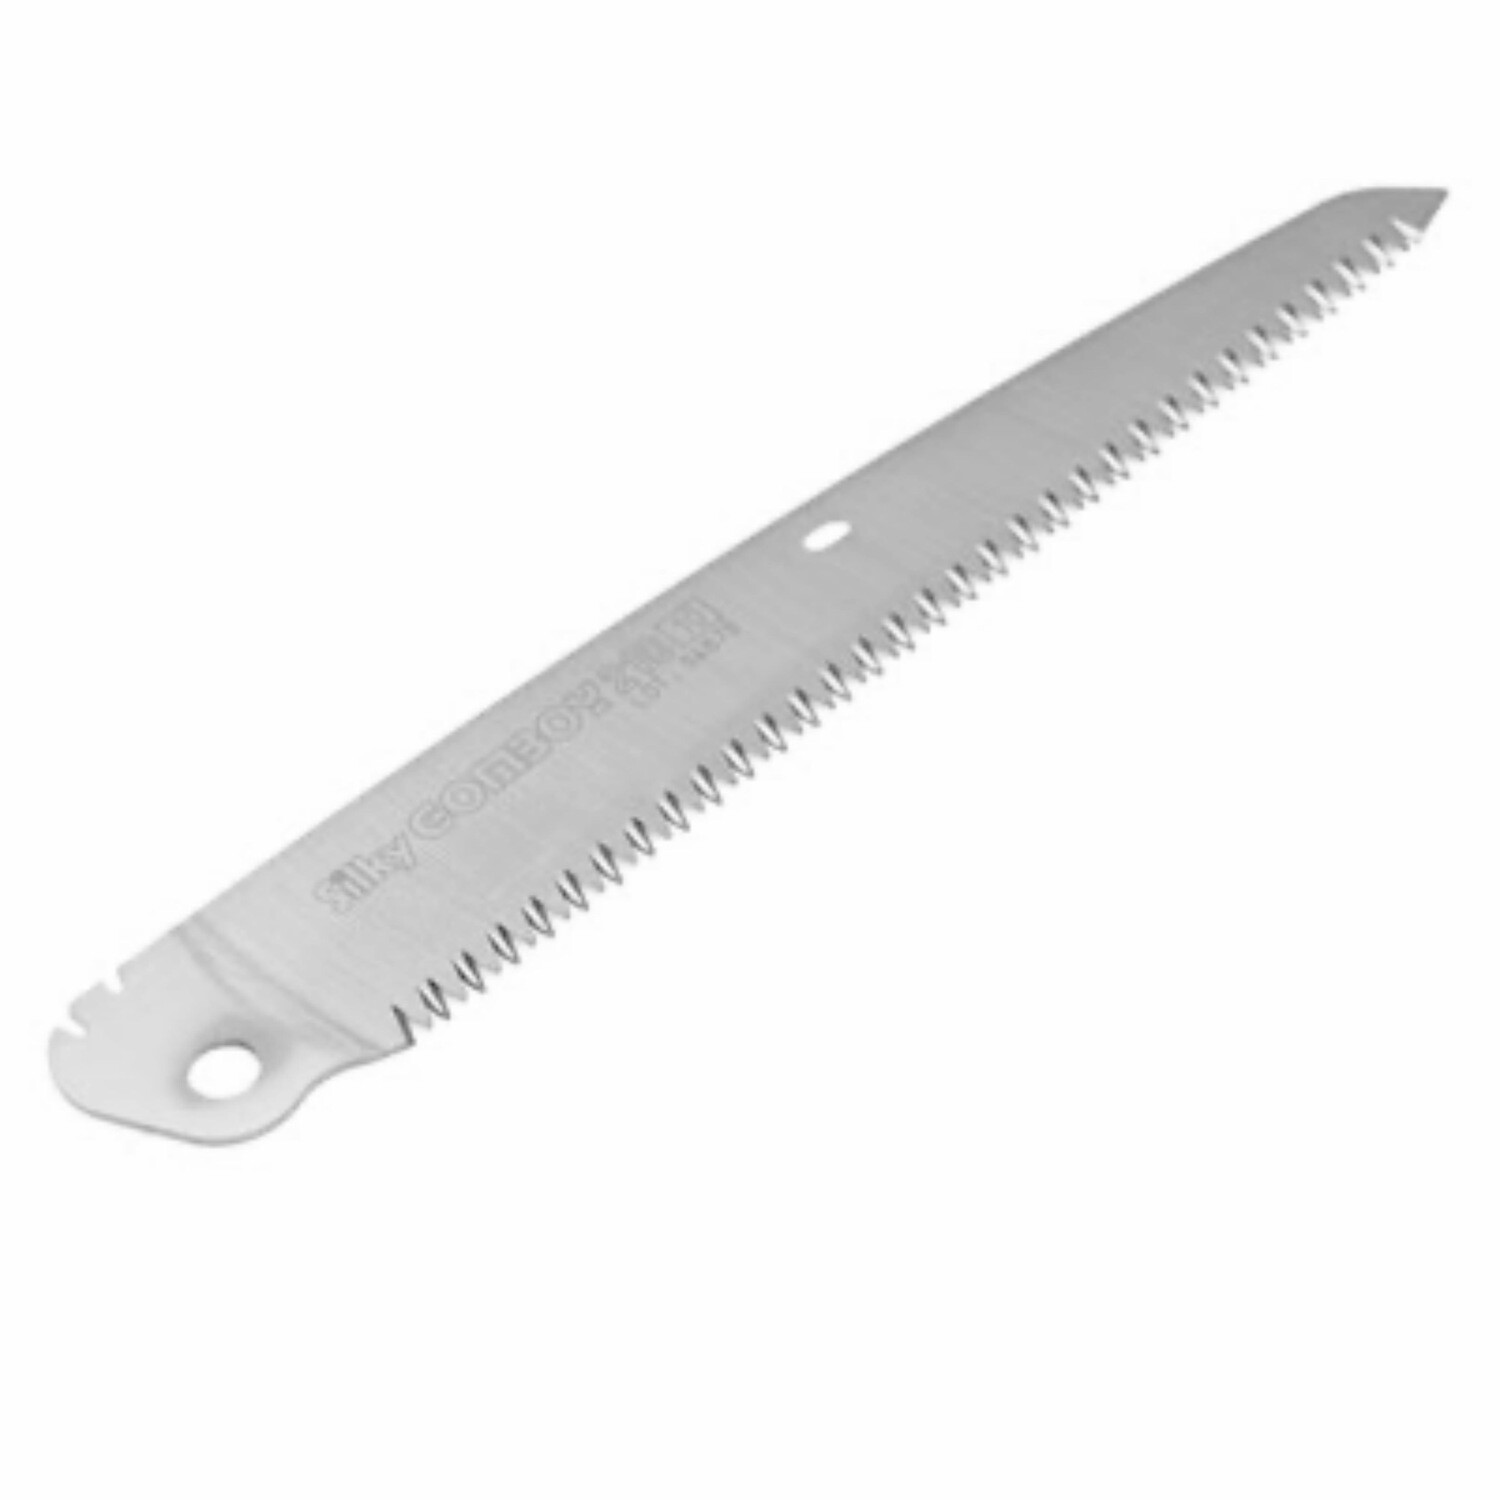 Silky GOMBOY 240mm Medium Teeth, Saw Replacement Blade [BLADE ONLY], 122-24